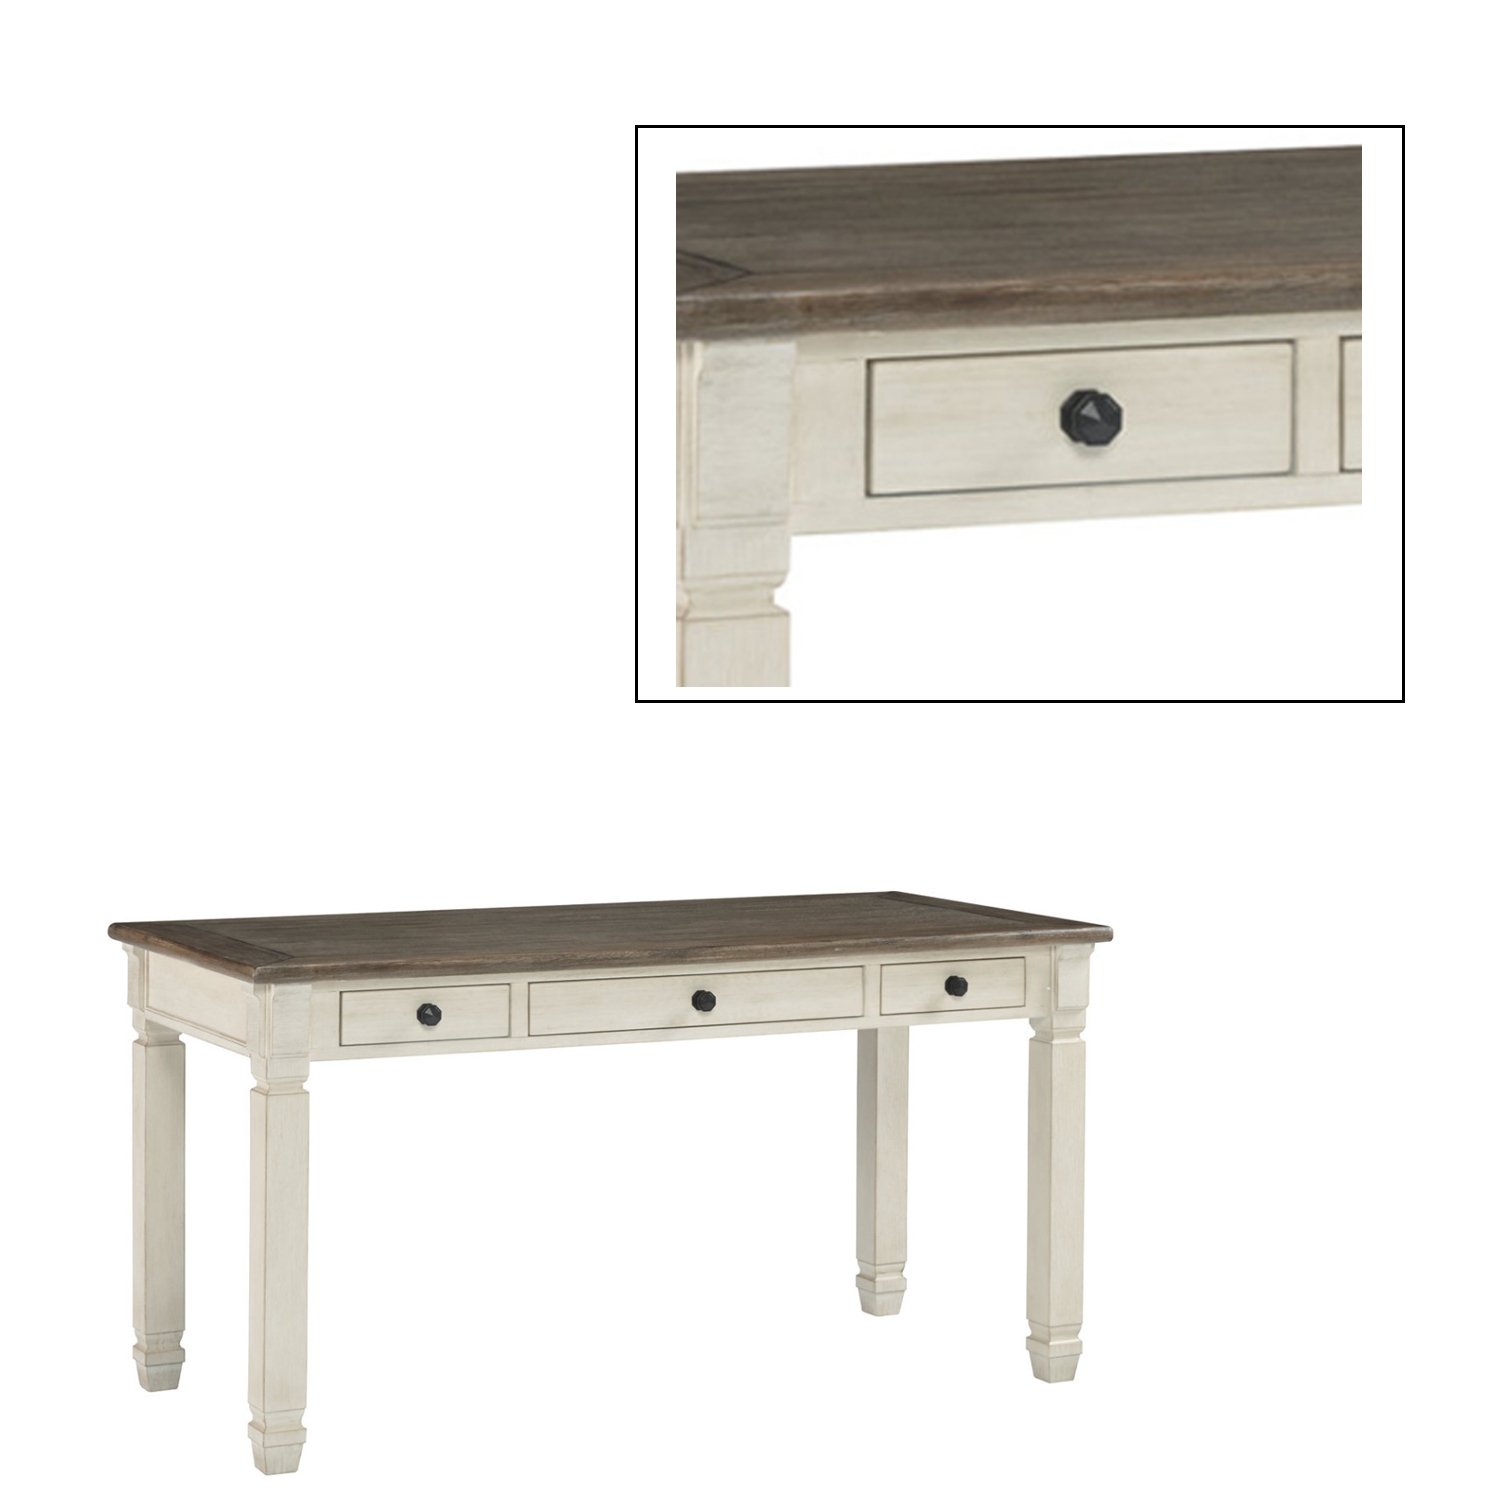 Three Drawer Wooden Desk With Plank Style Top, Brown And White- Saltoro Sherpi